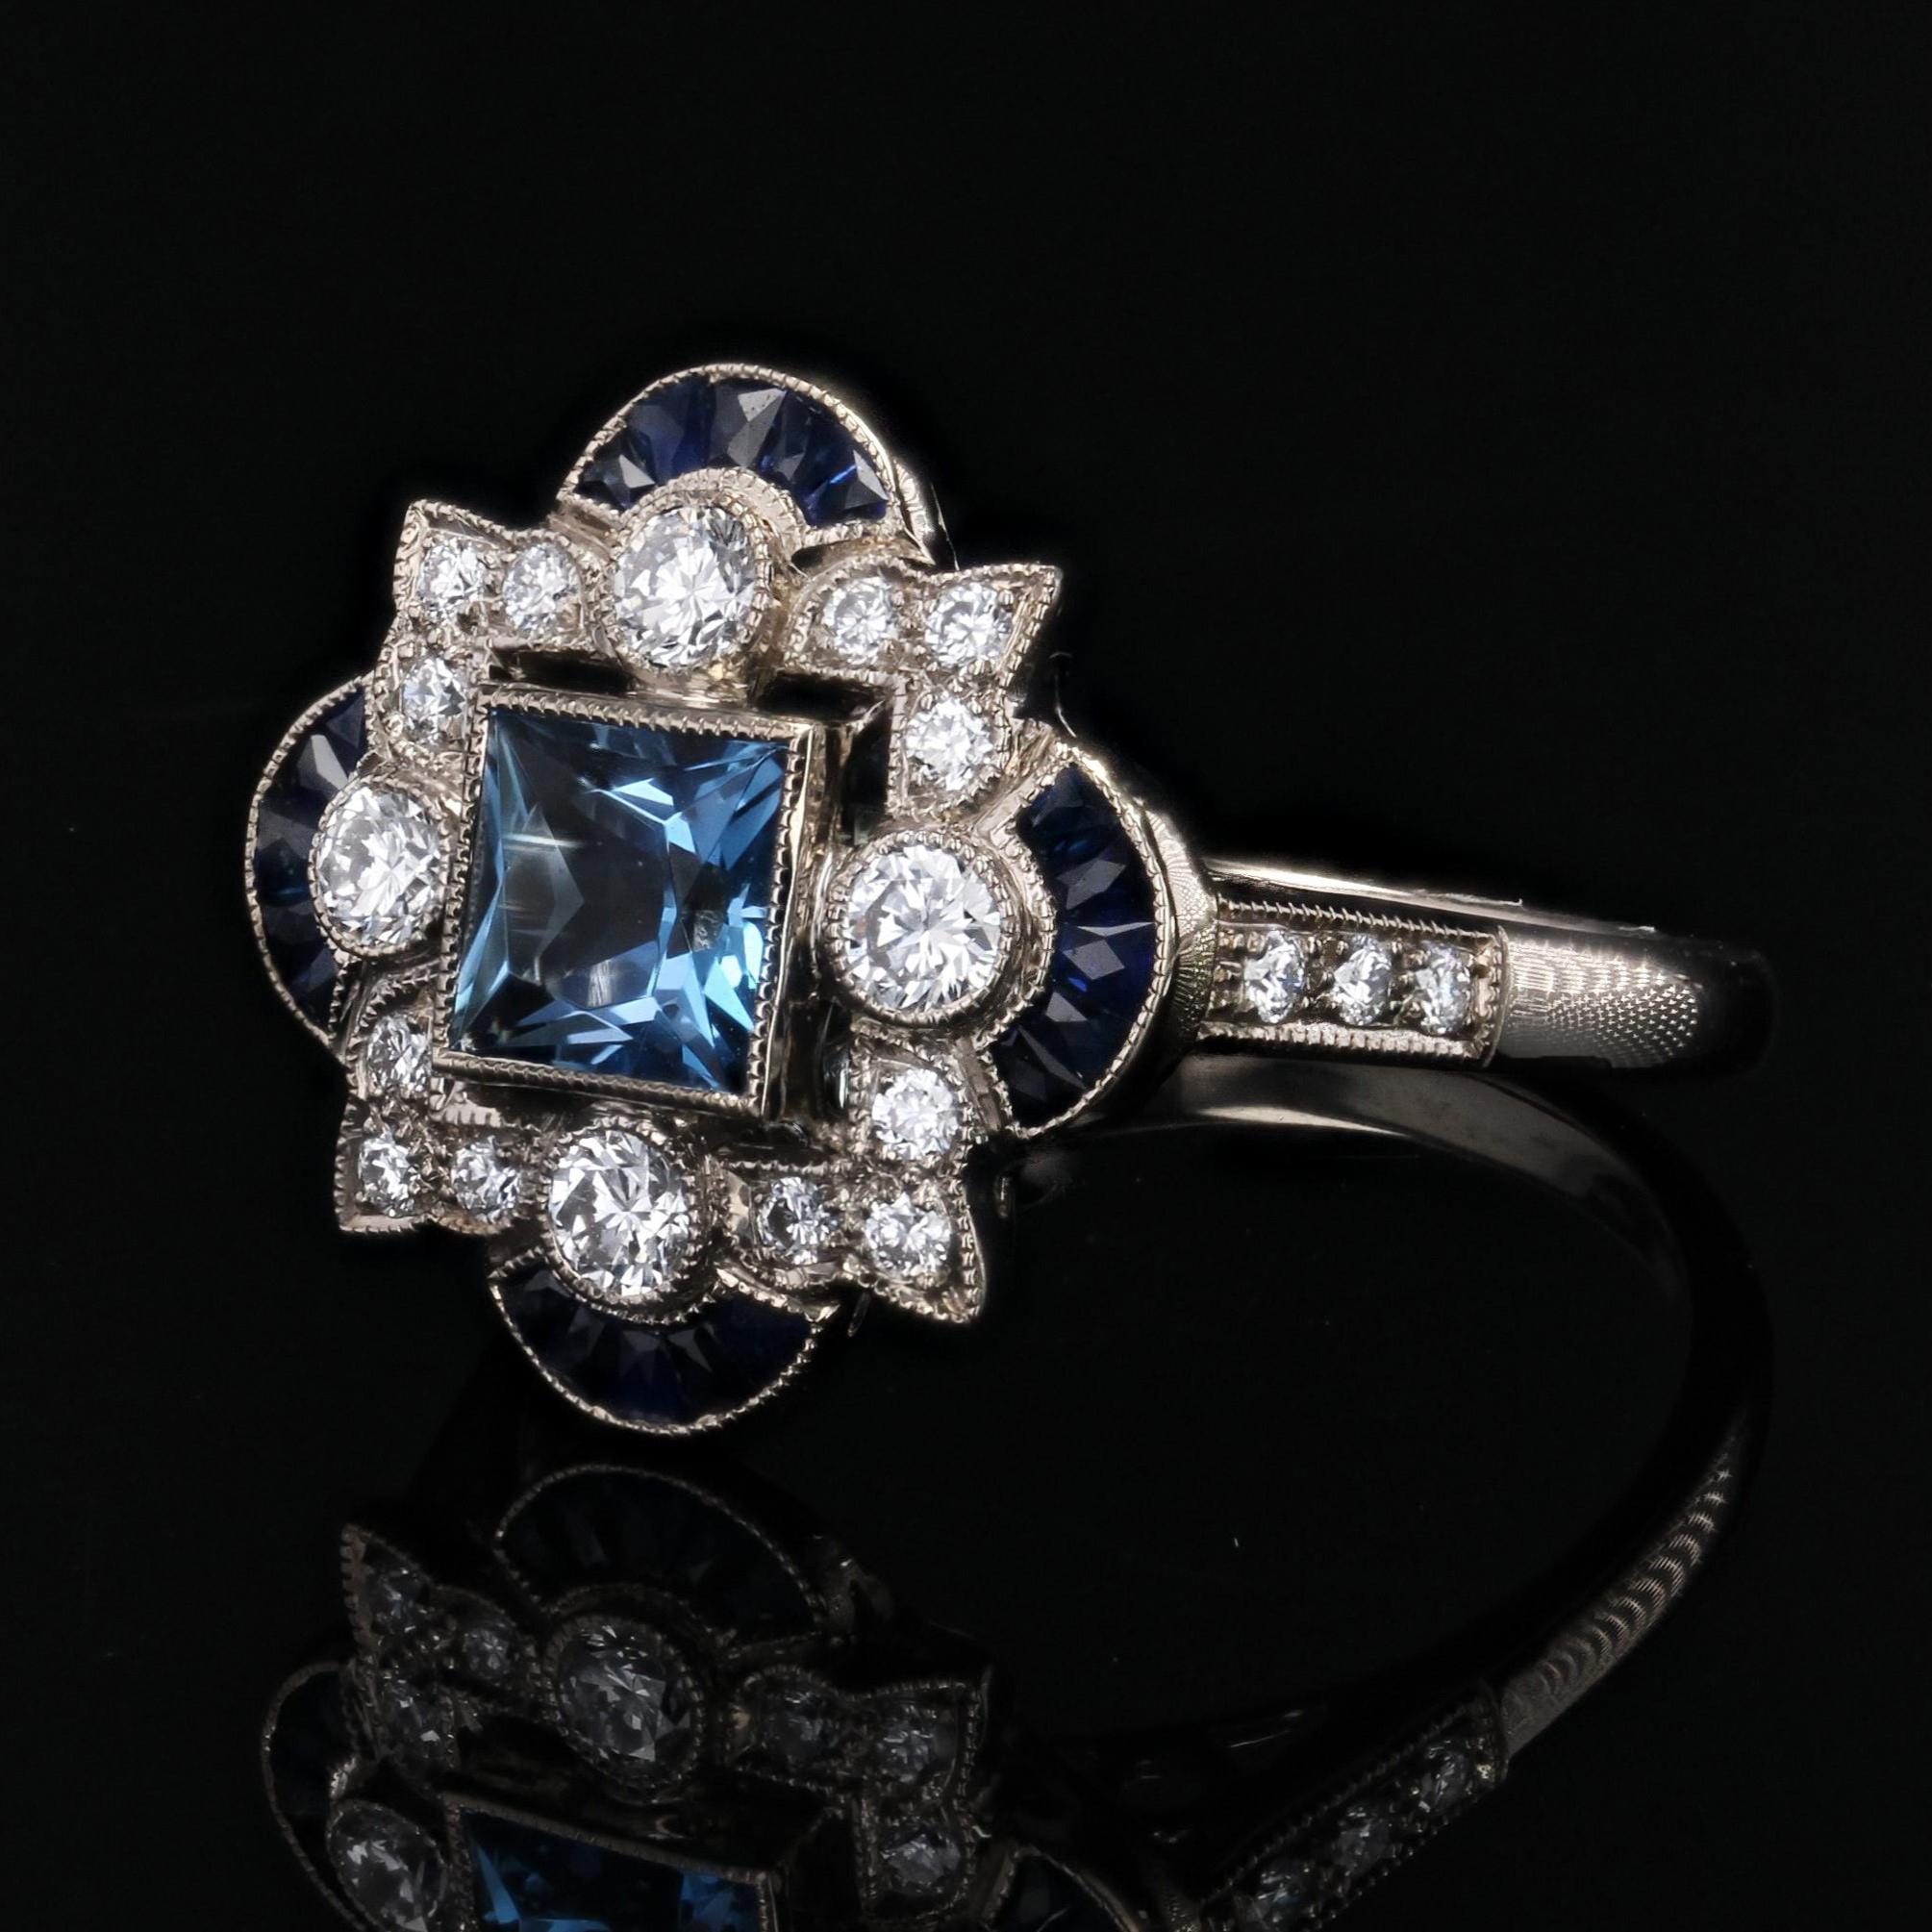 New Art Deco Style Aquamarine Calibrated Sapphires Diamonds 18K White Gold Ring For Sale 2